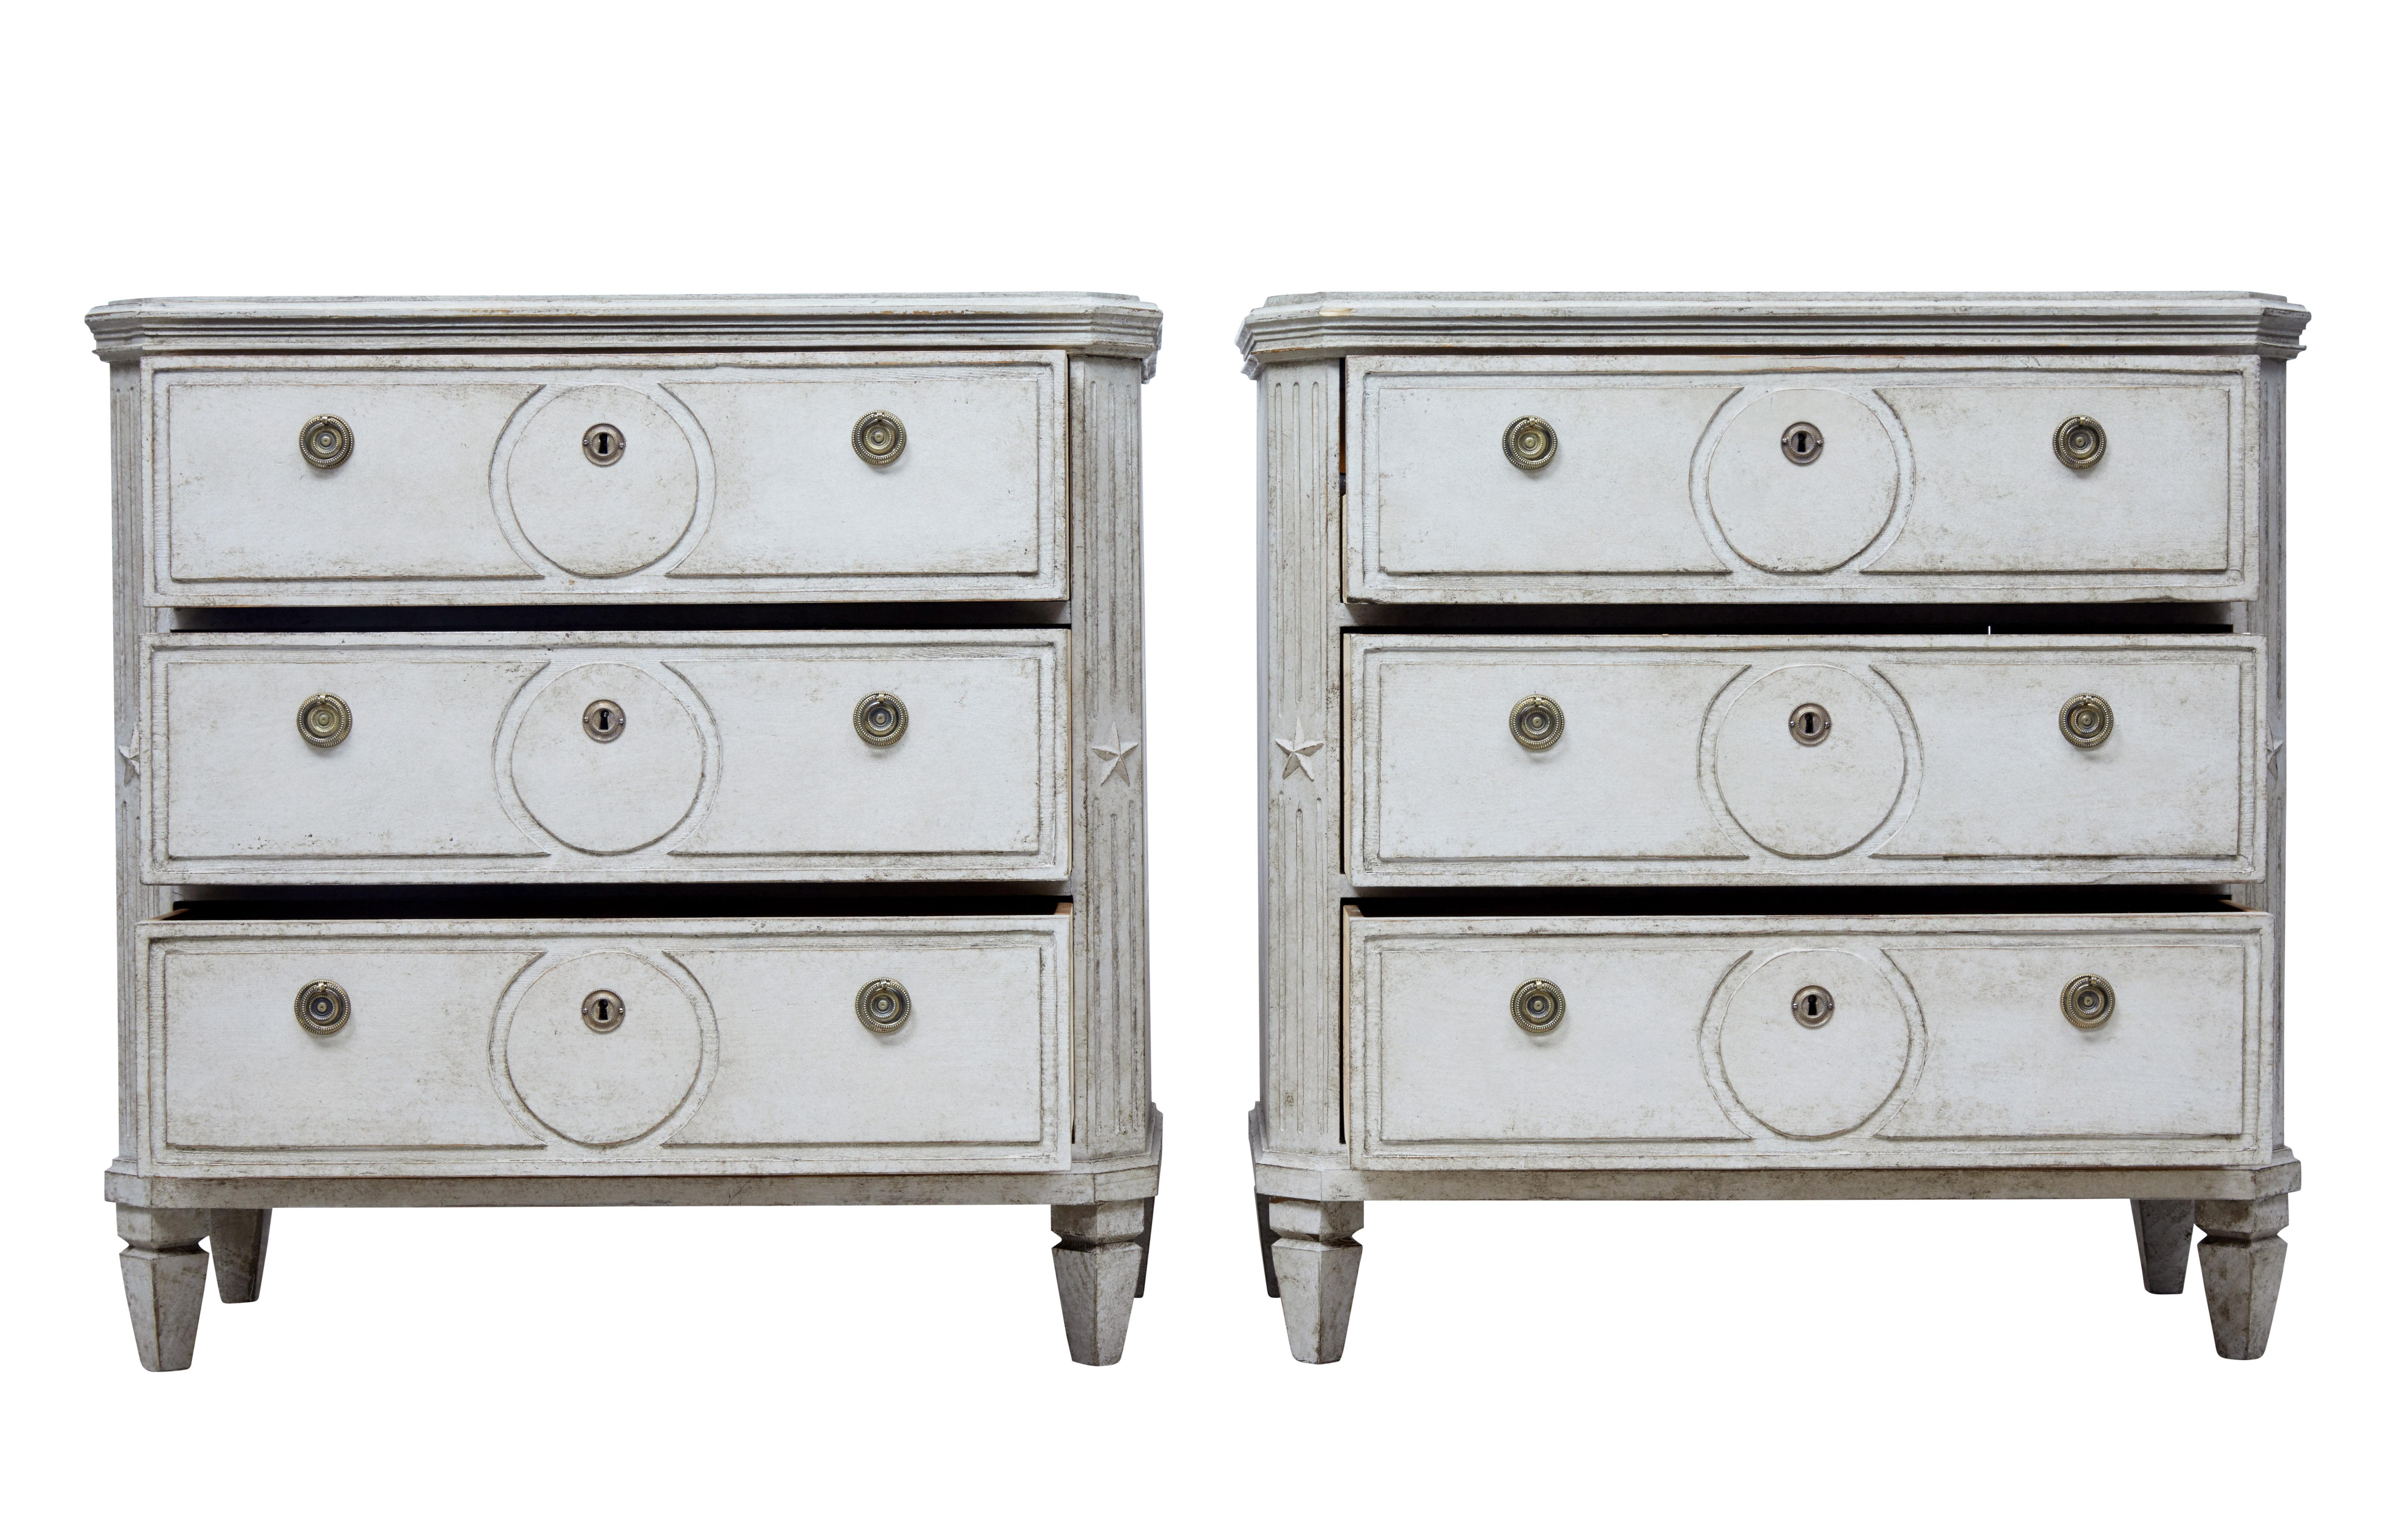 Good quality pair of chest of drawers, circa 1870.

3-drawer chests with channelled detailing on the drawer fronts. Canted corners with applied star motif.

On one chest of drawers the top drawer opens to reveal 2 fitted drawers.

Later paint